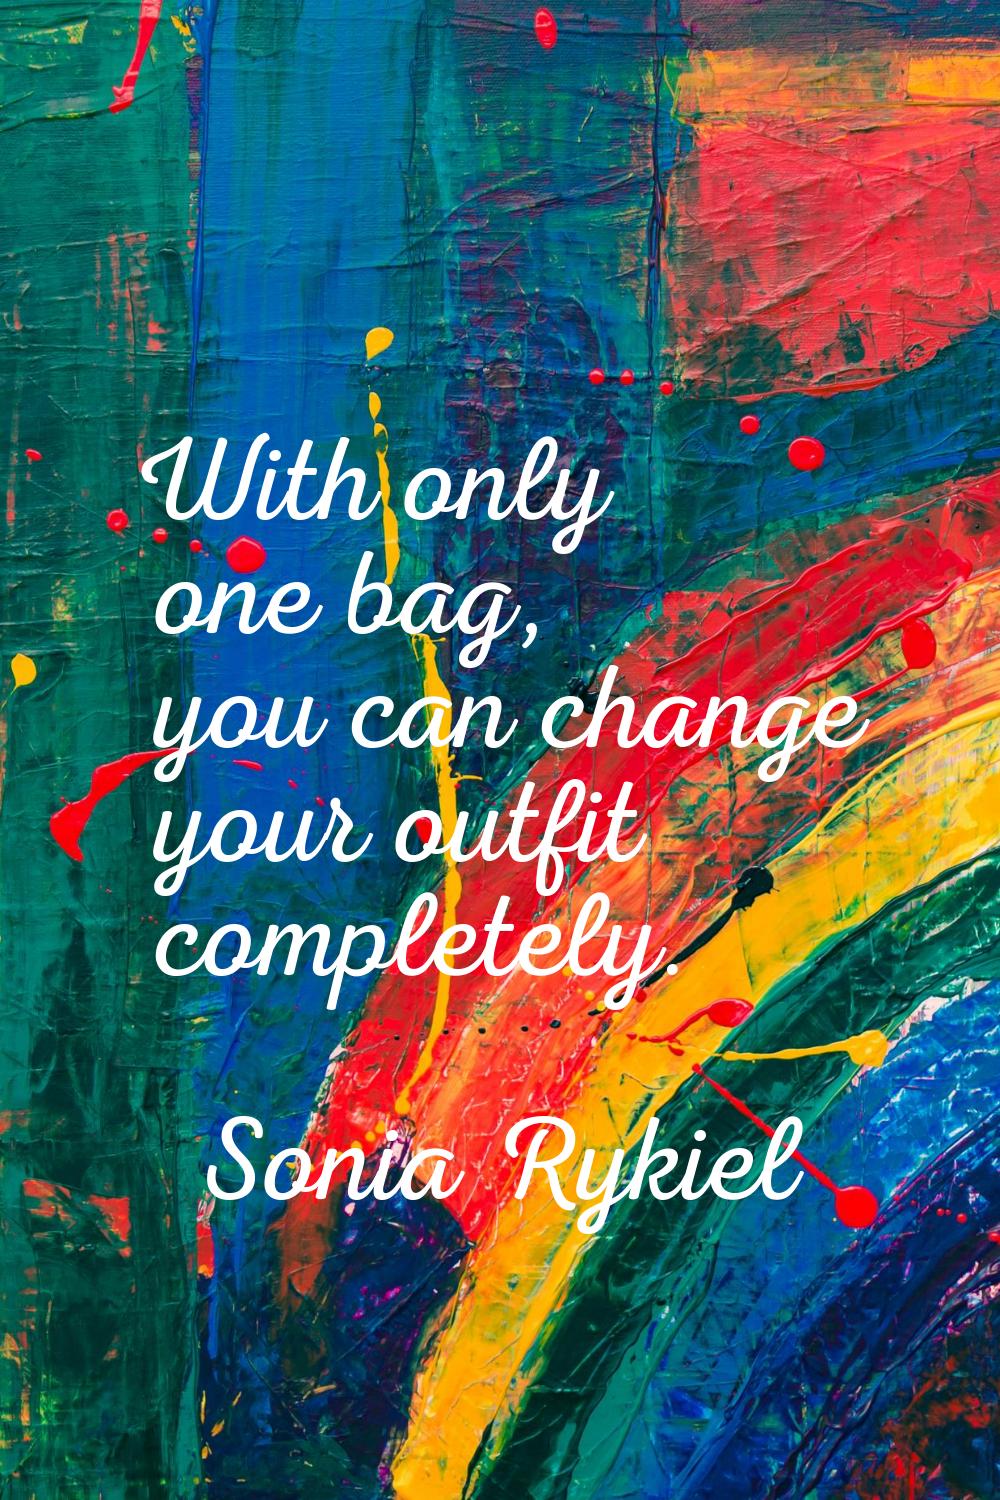 With only one bag, you can change your outfit completely.